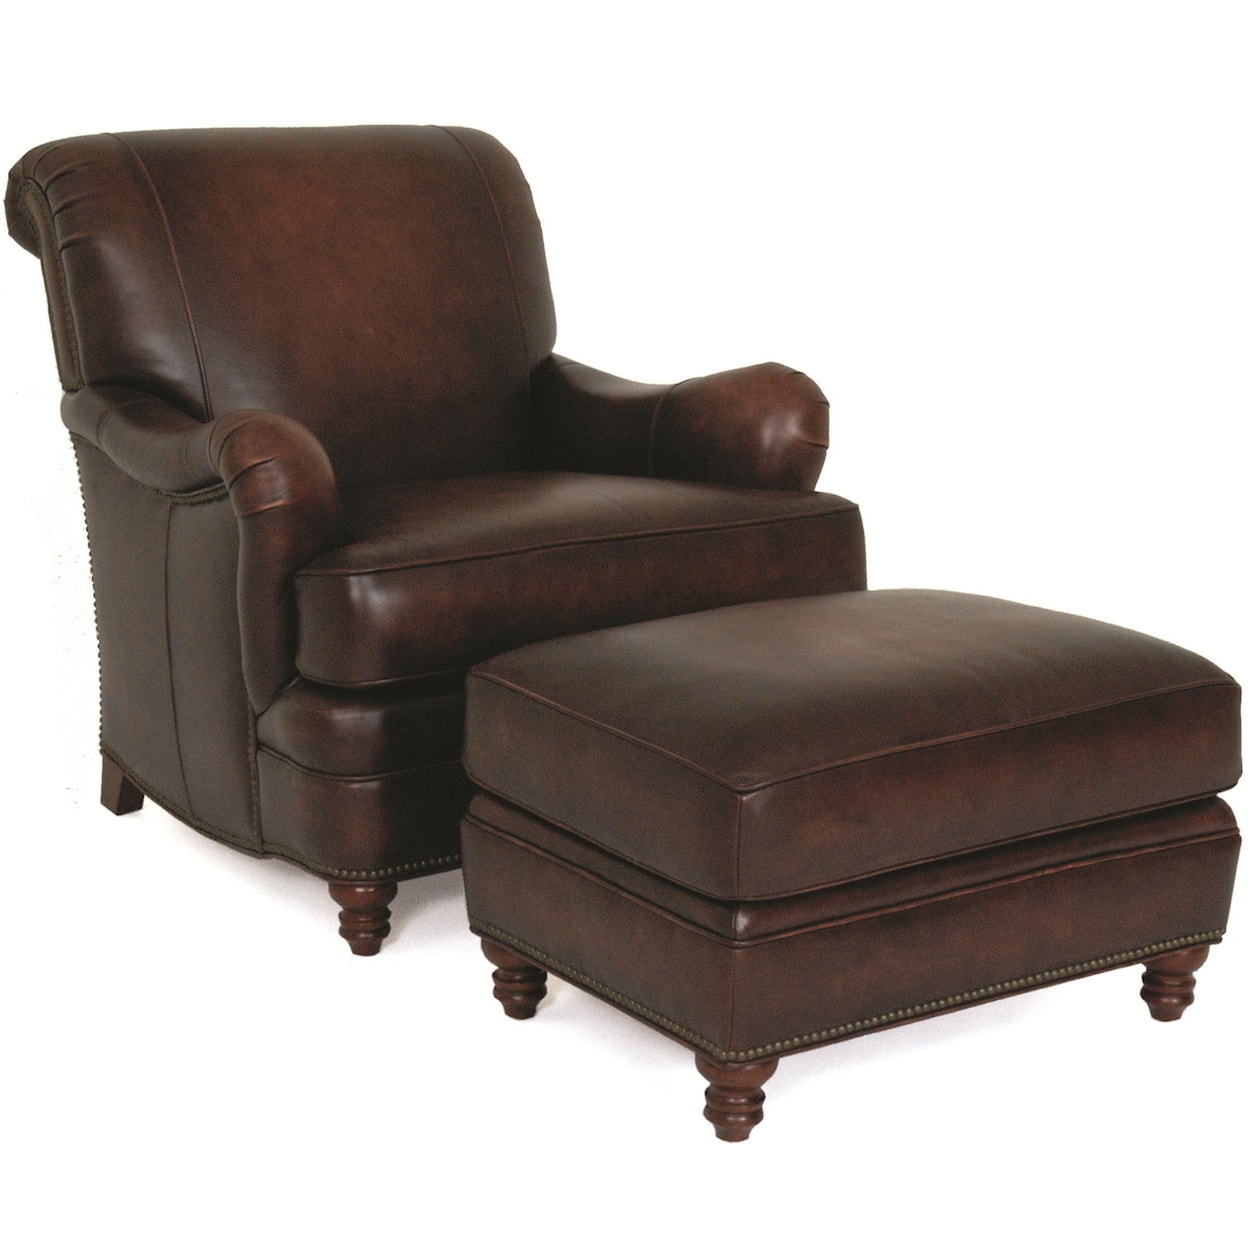 Norwalk Ellis Traditional Chair And Ottoman